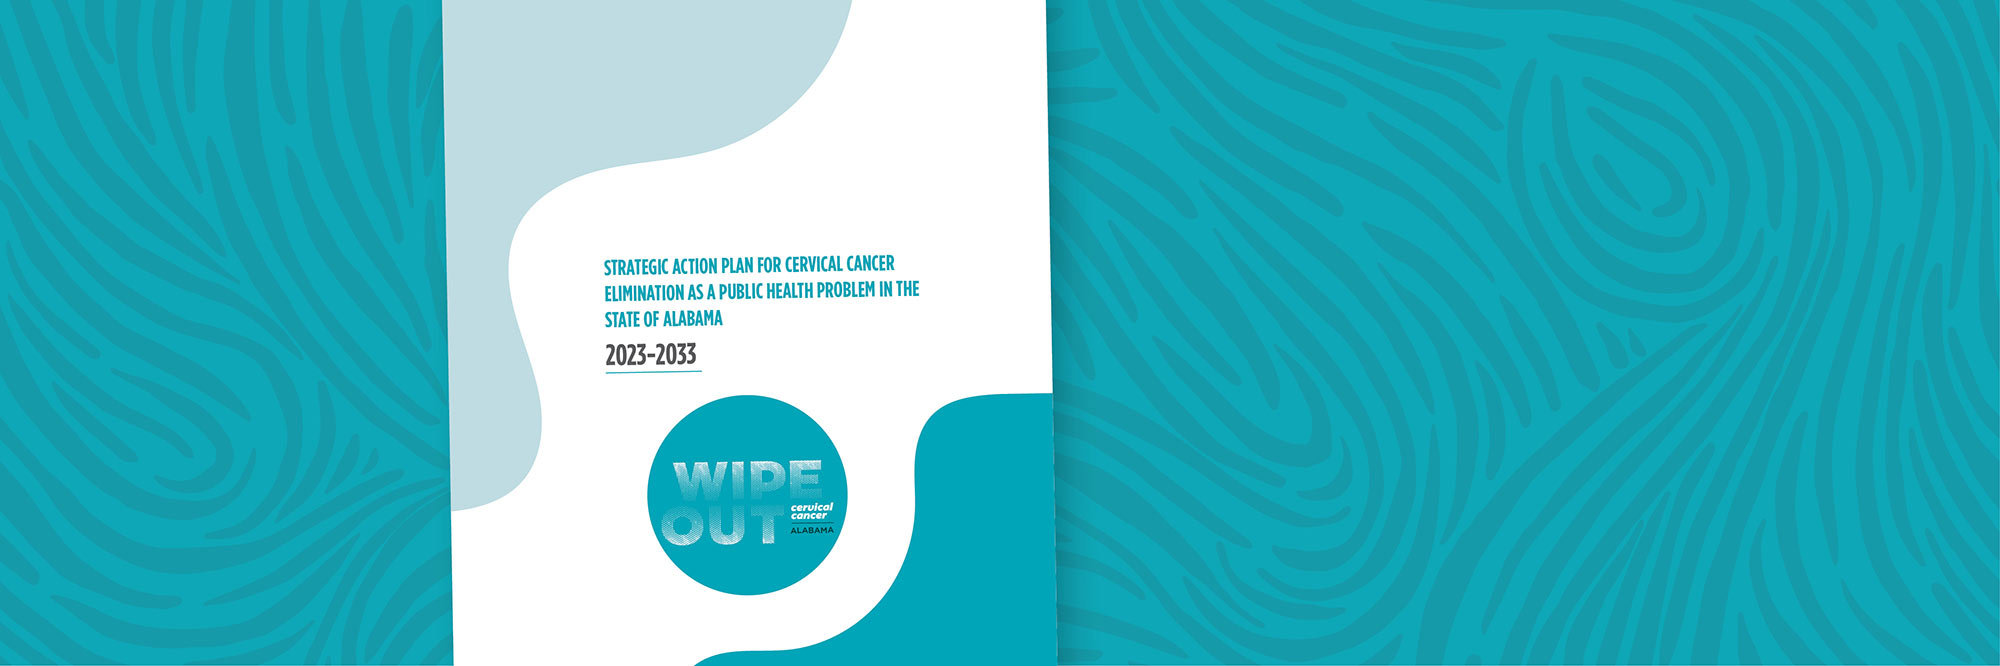 image of the cover of the state plan for Operation Wipe Out Cervical Cancer Alabama